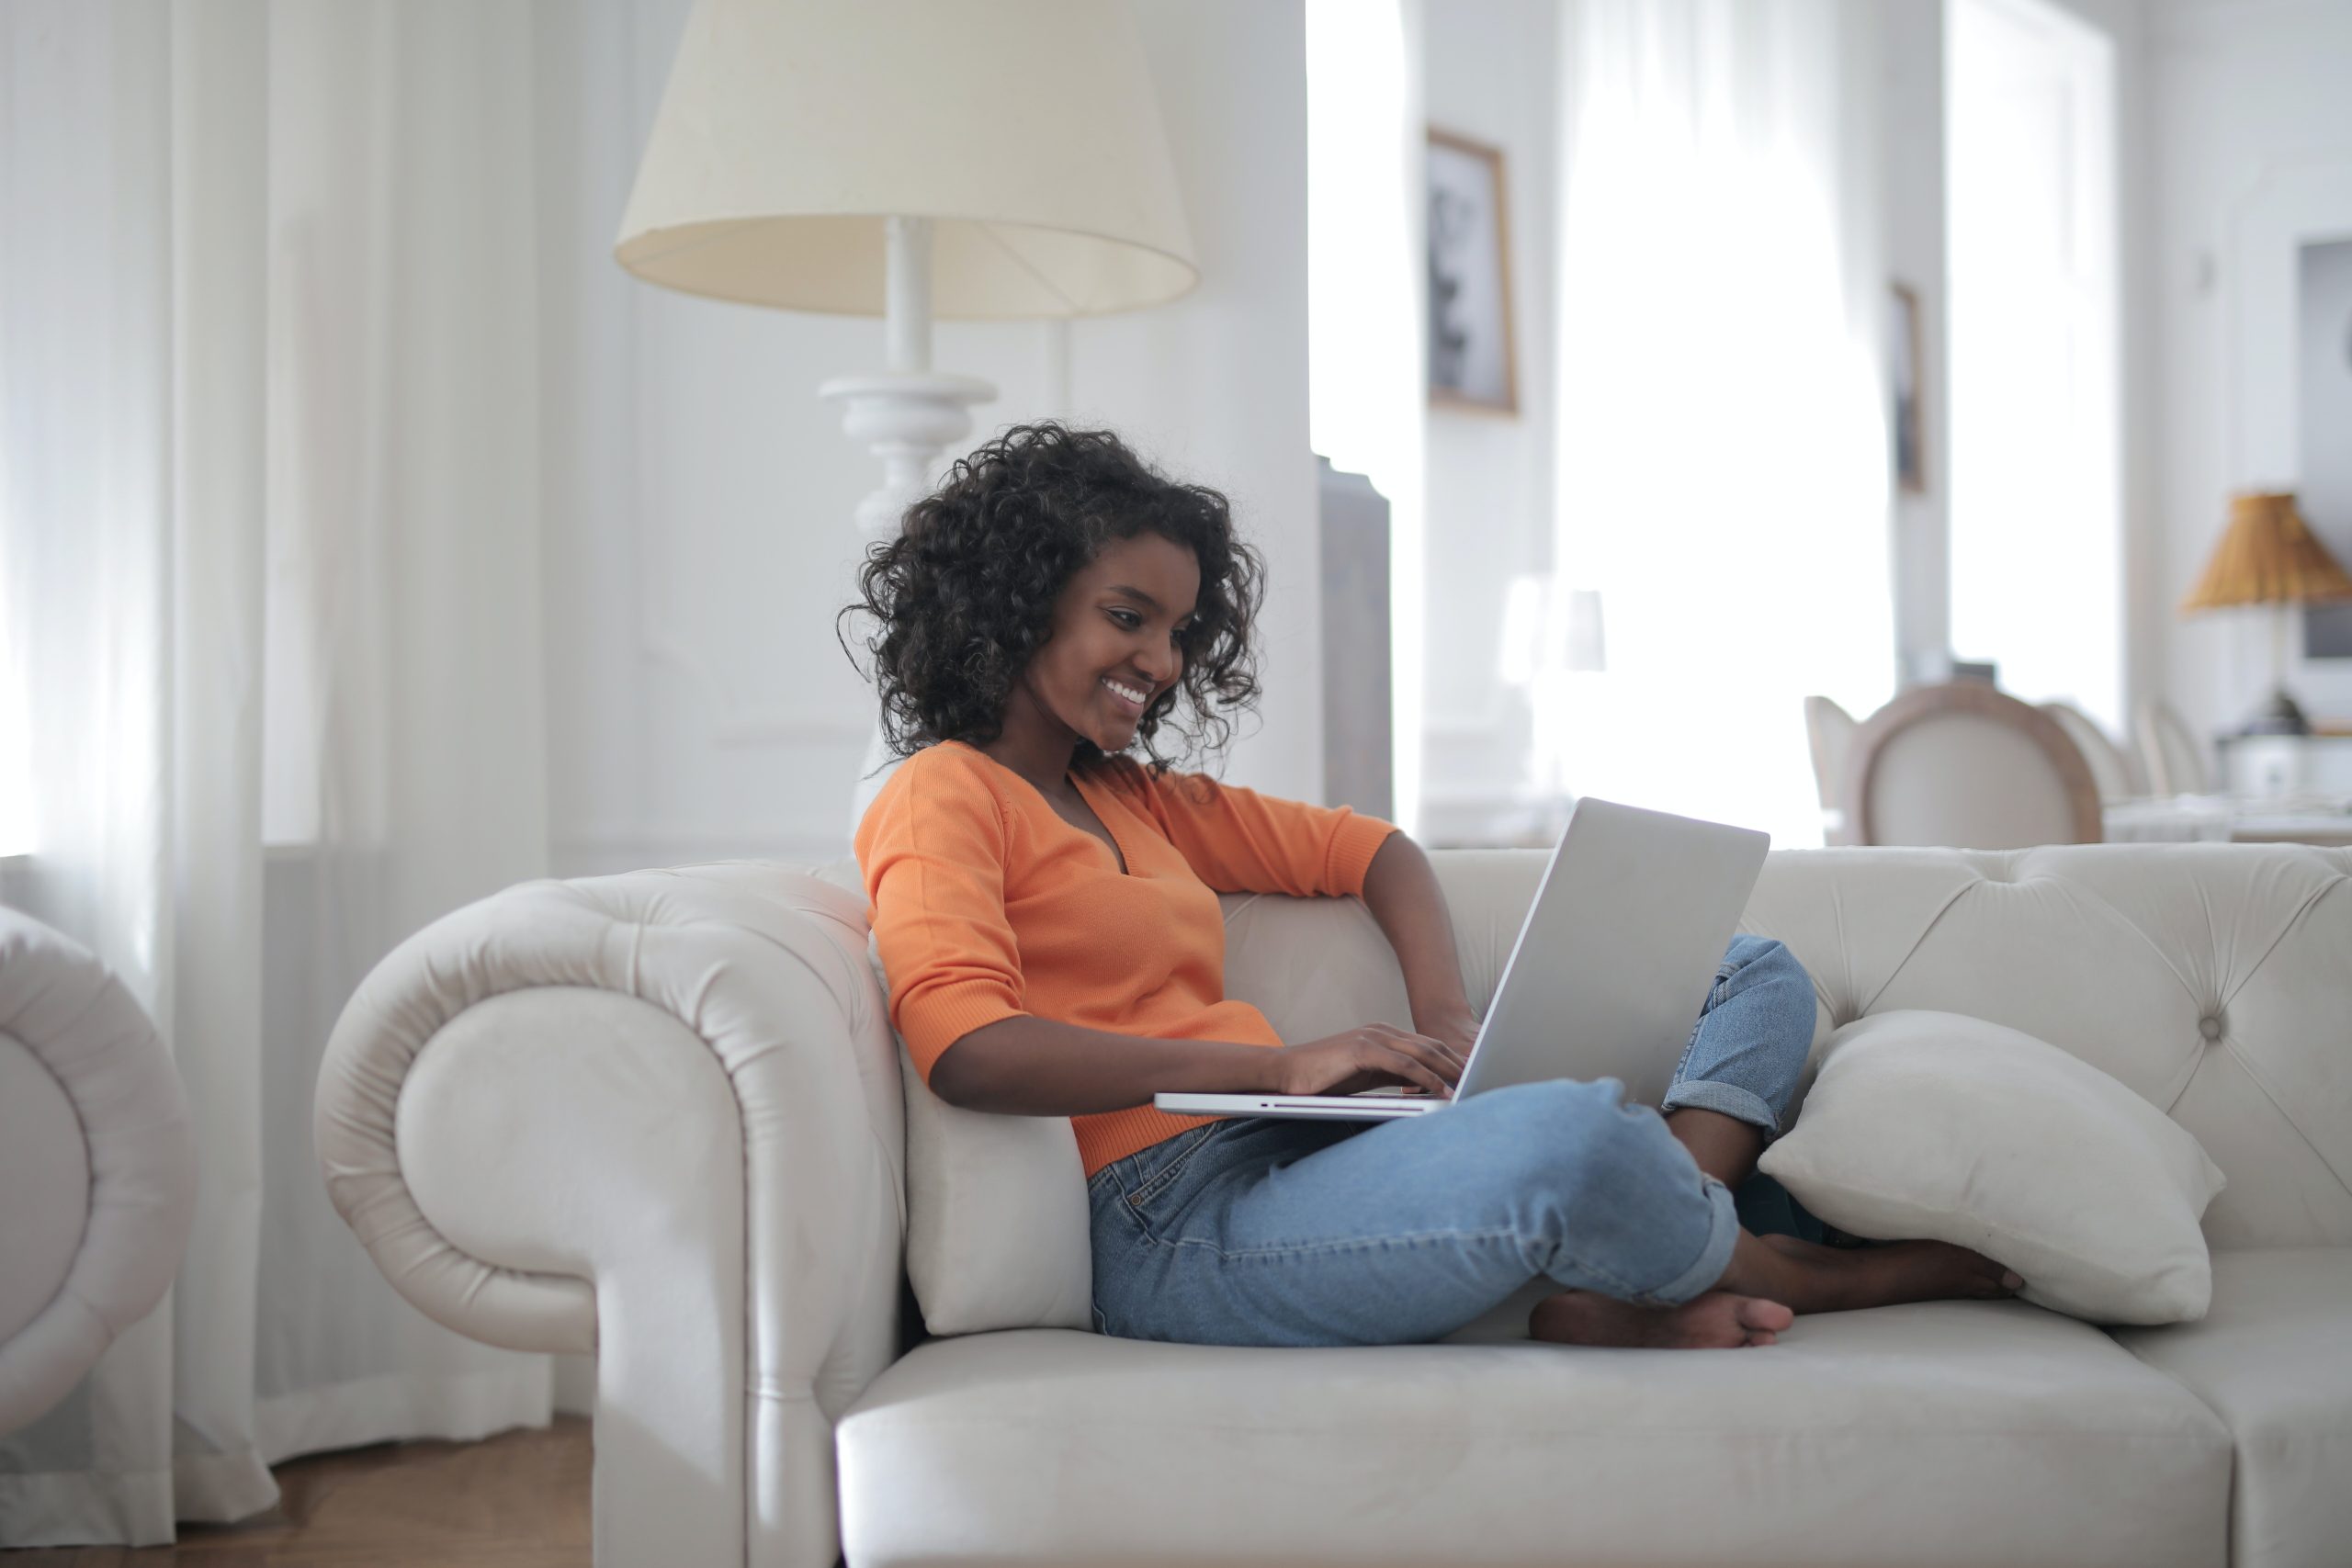 Photo of smiling woman sitting on a couch with a laptop.